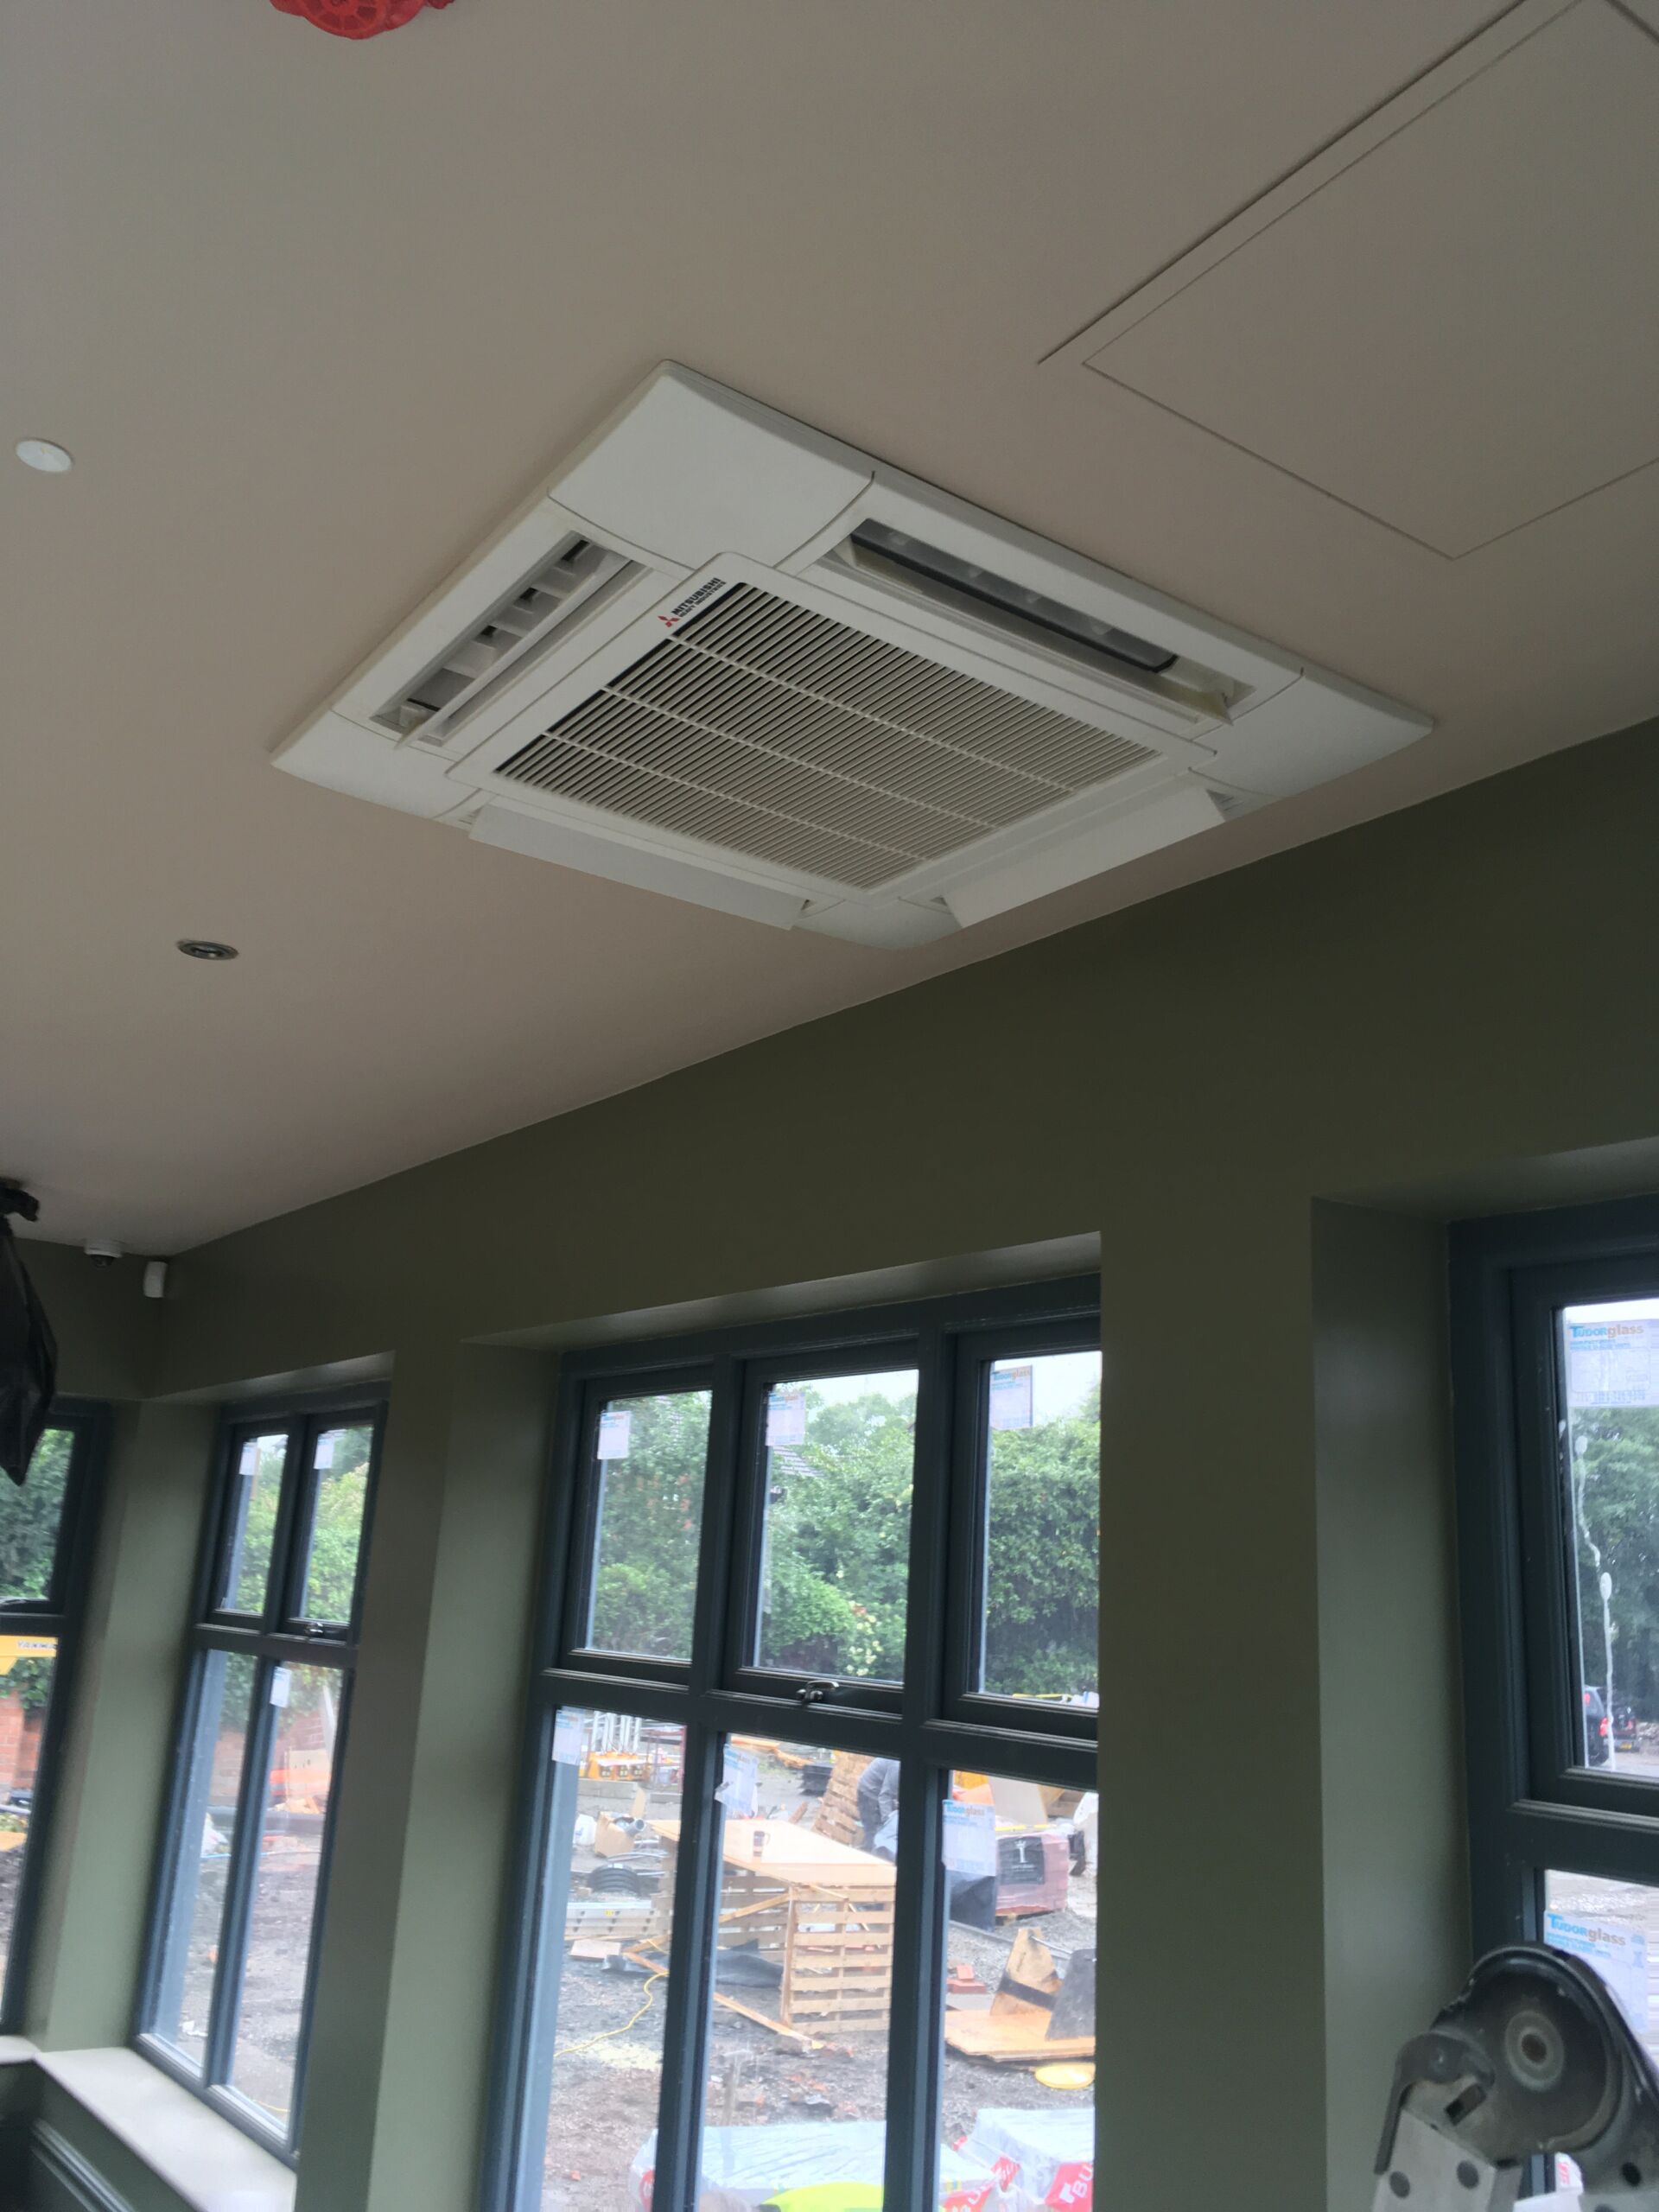 Air conditioning unit installed in a ceiling